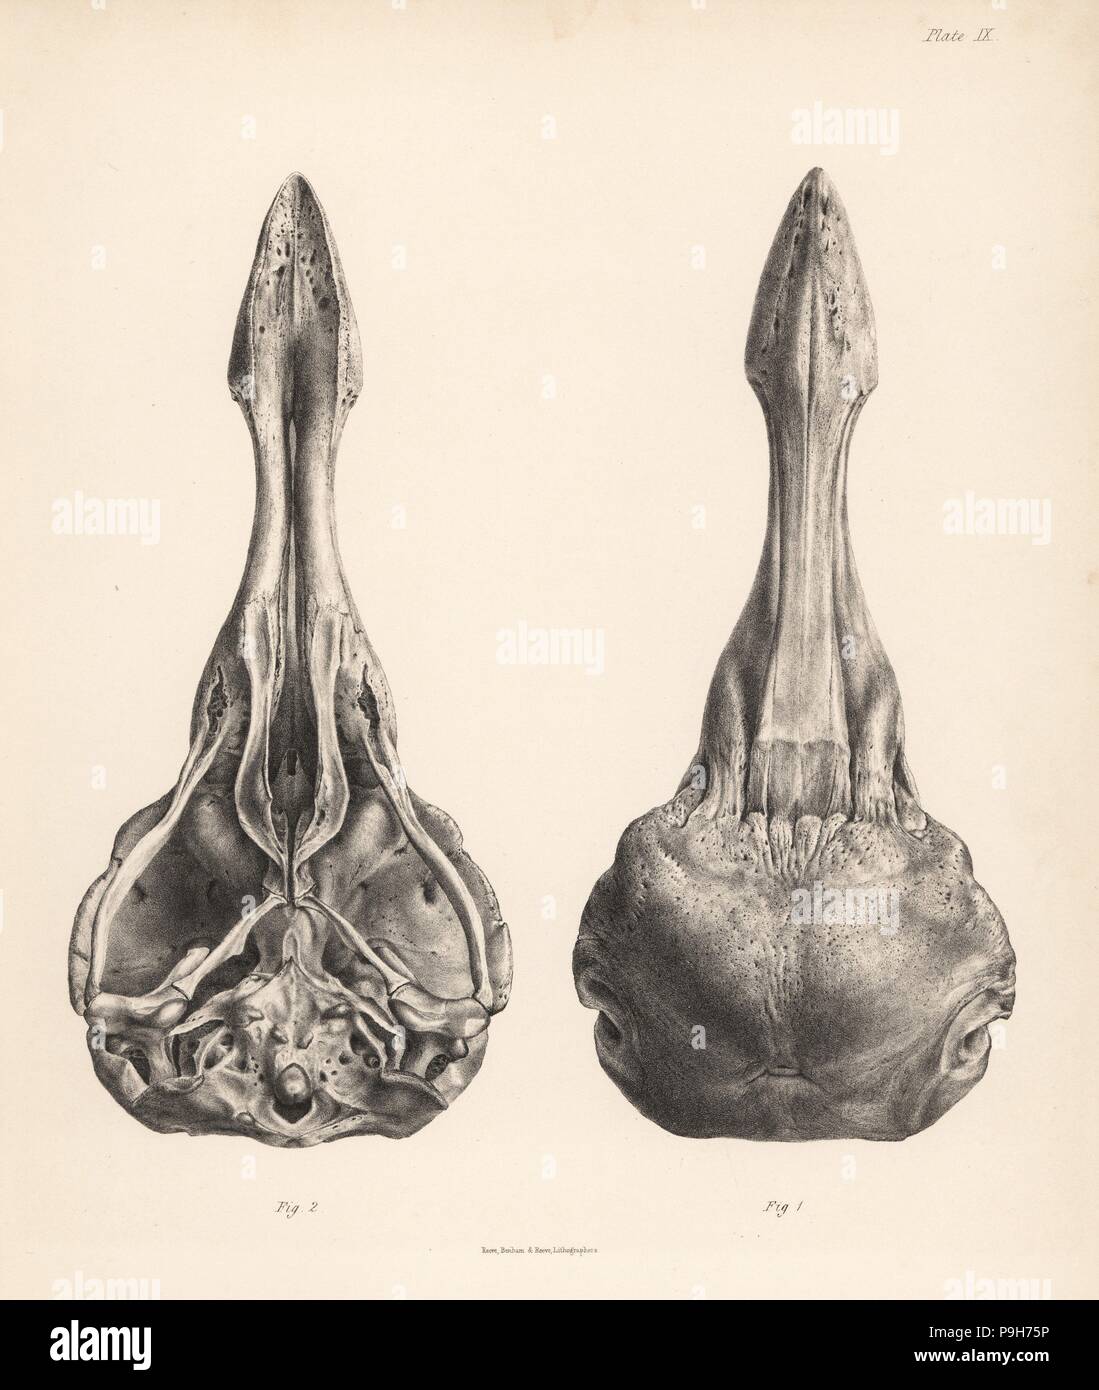 Upper and lower views of the skull of a dodo. Lithograph from Hugh Edwin Strickland and Alexander Gordon Melville's The Dodo and its Kindred, London, Reeve, Benham and Reeve, 1848. Stock Photo